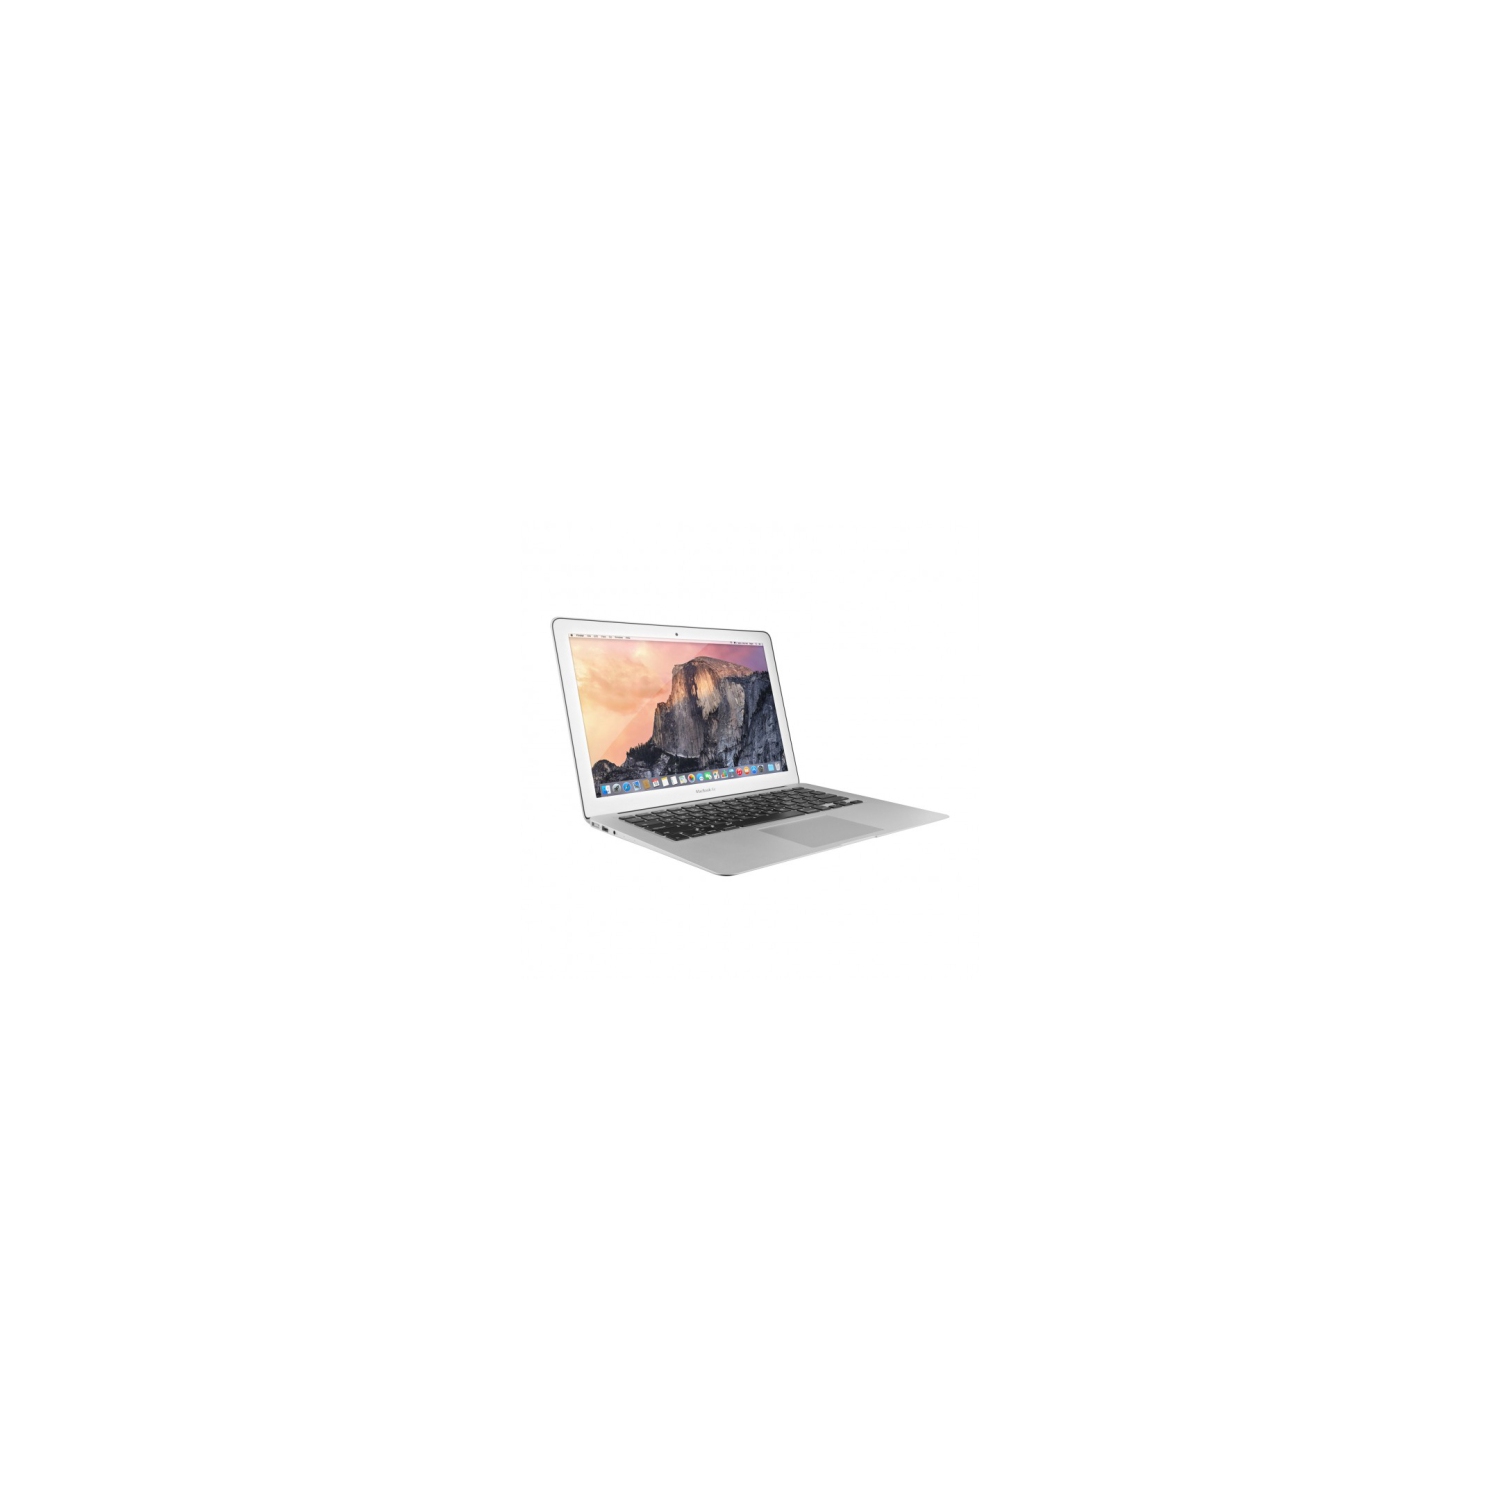 Refurbished (Excellent) - Apple MacBook Air 13" - Intel Core i5 1.6GHz / 4GB / 128GB - (2015 Model), Grade A, Excellent Condition